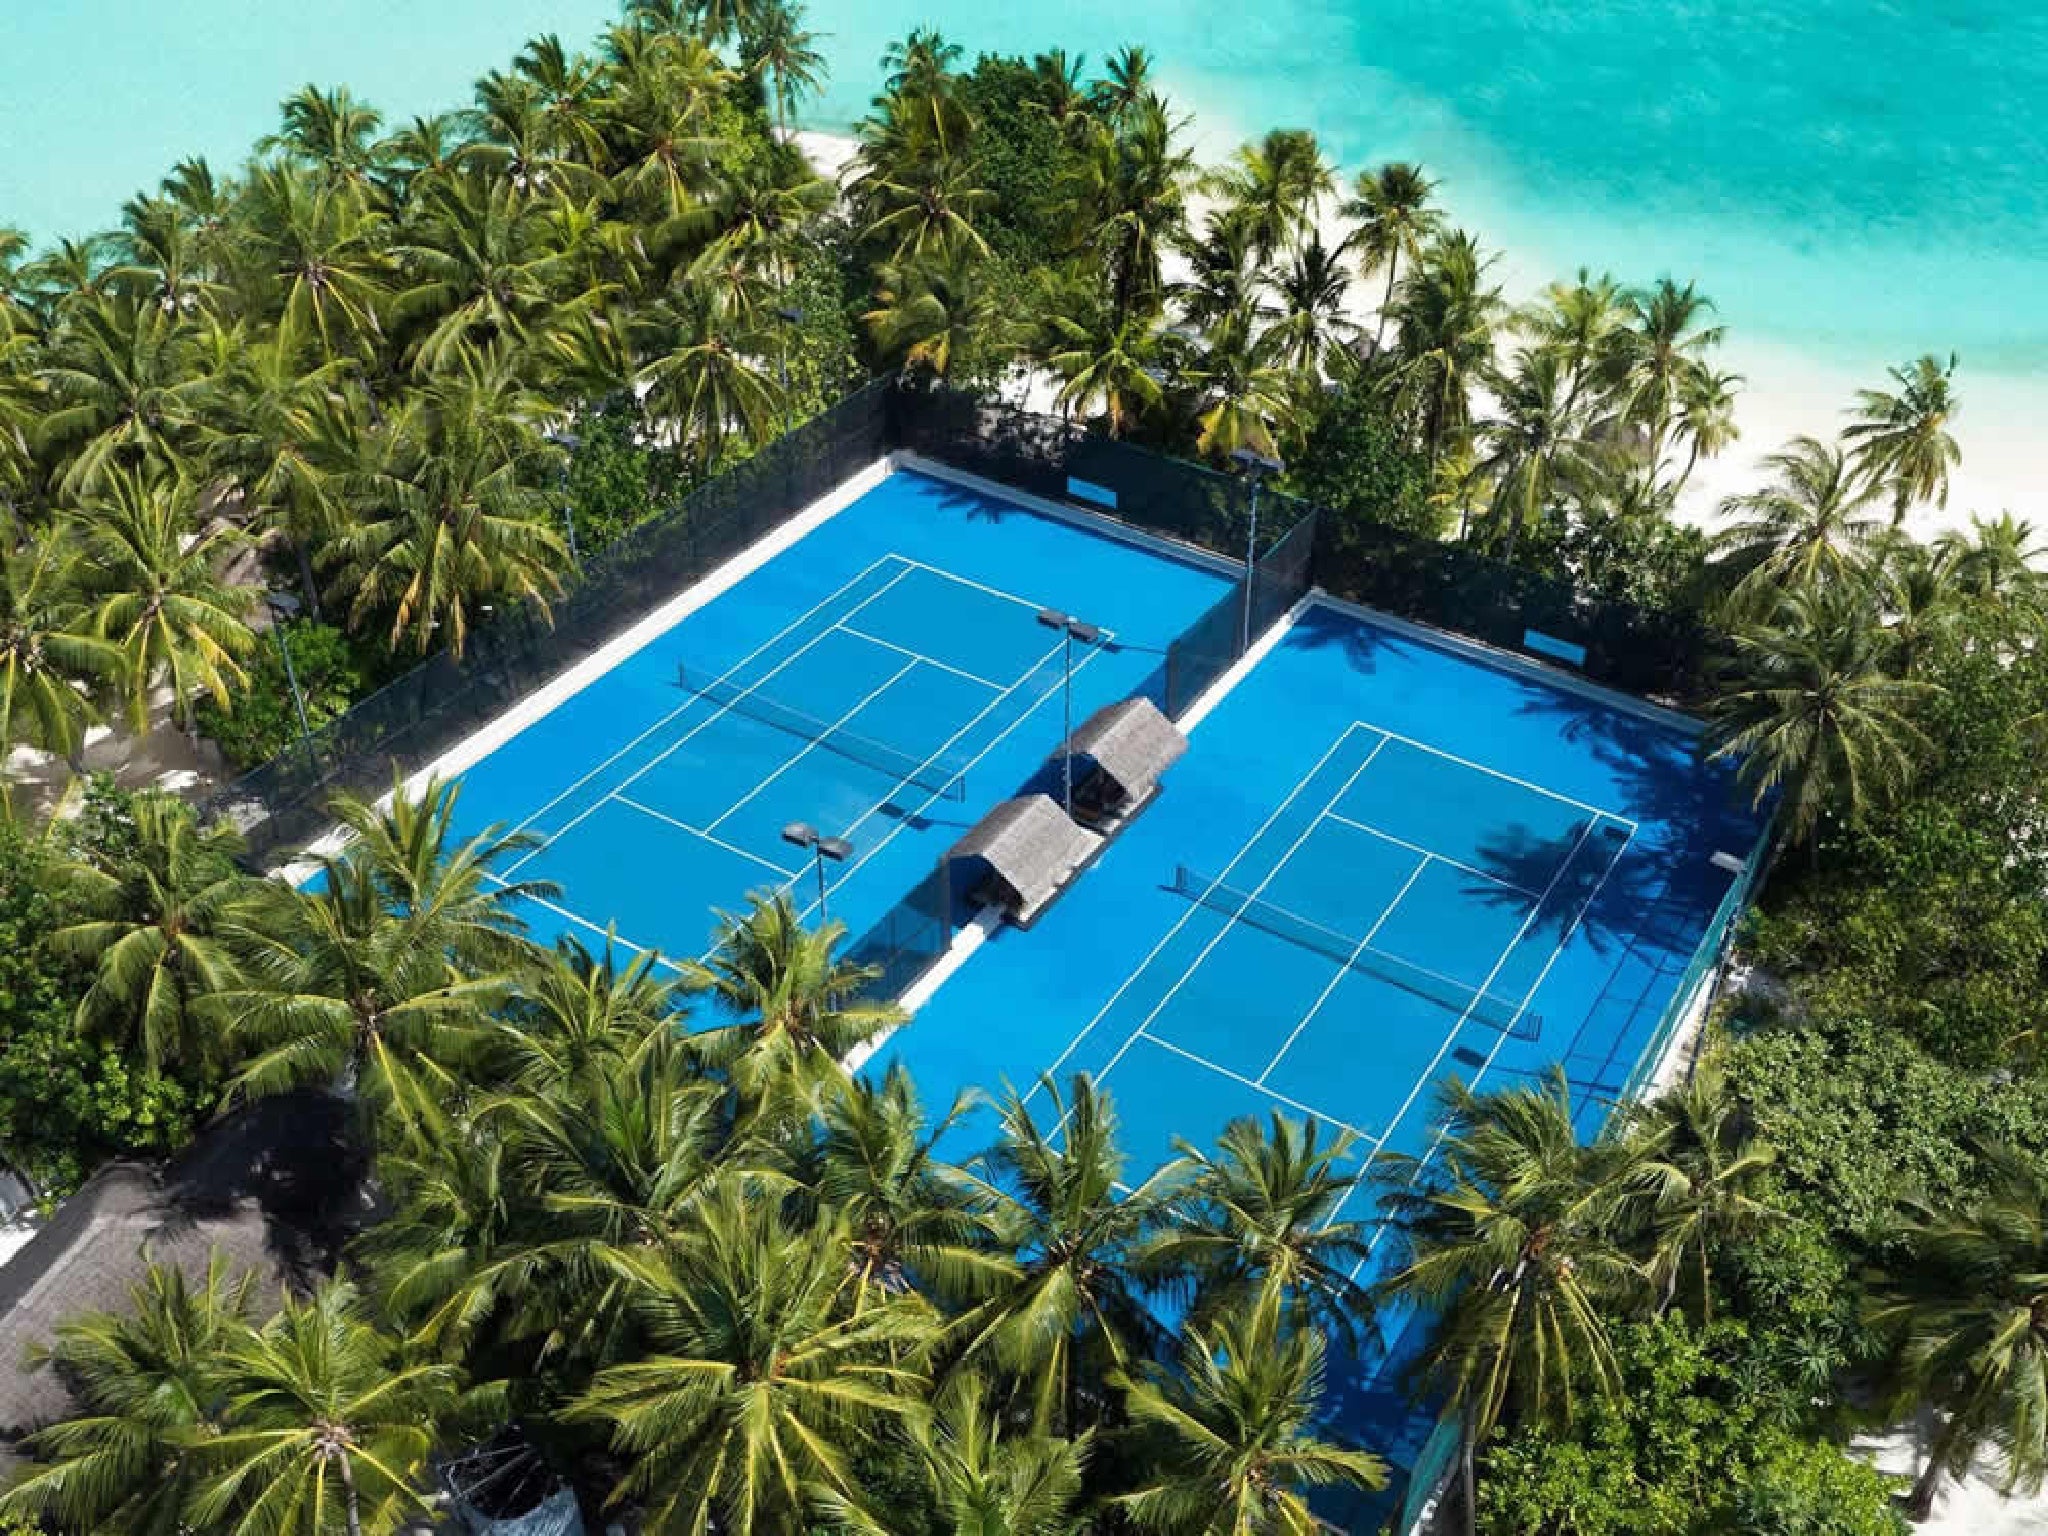 Play among the palm trees in the Maldives